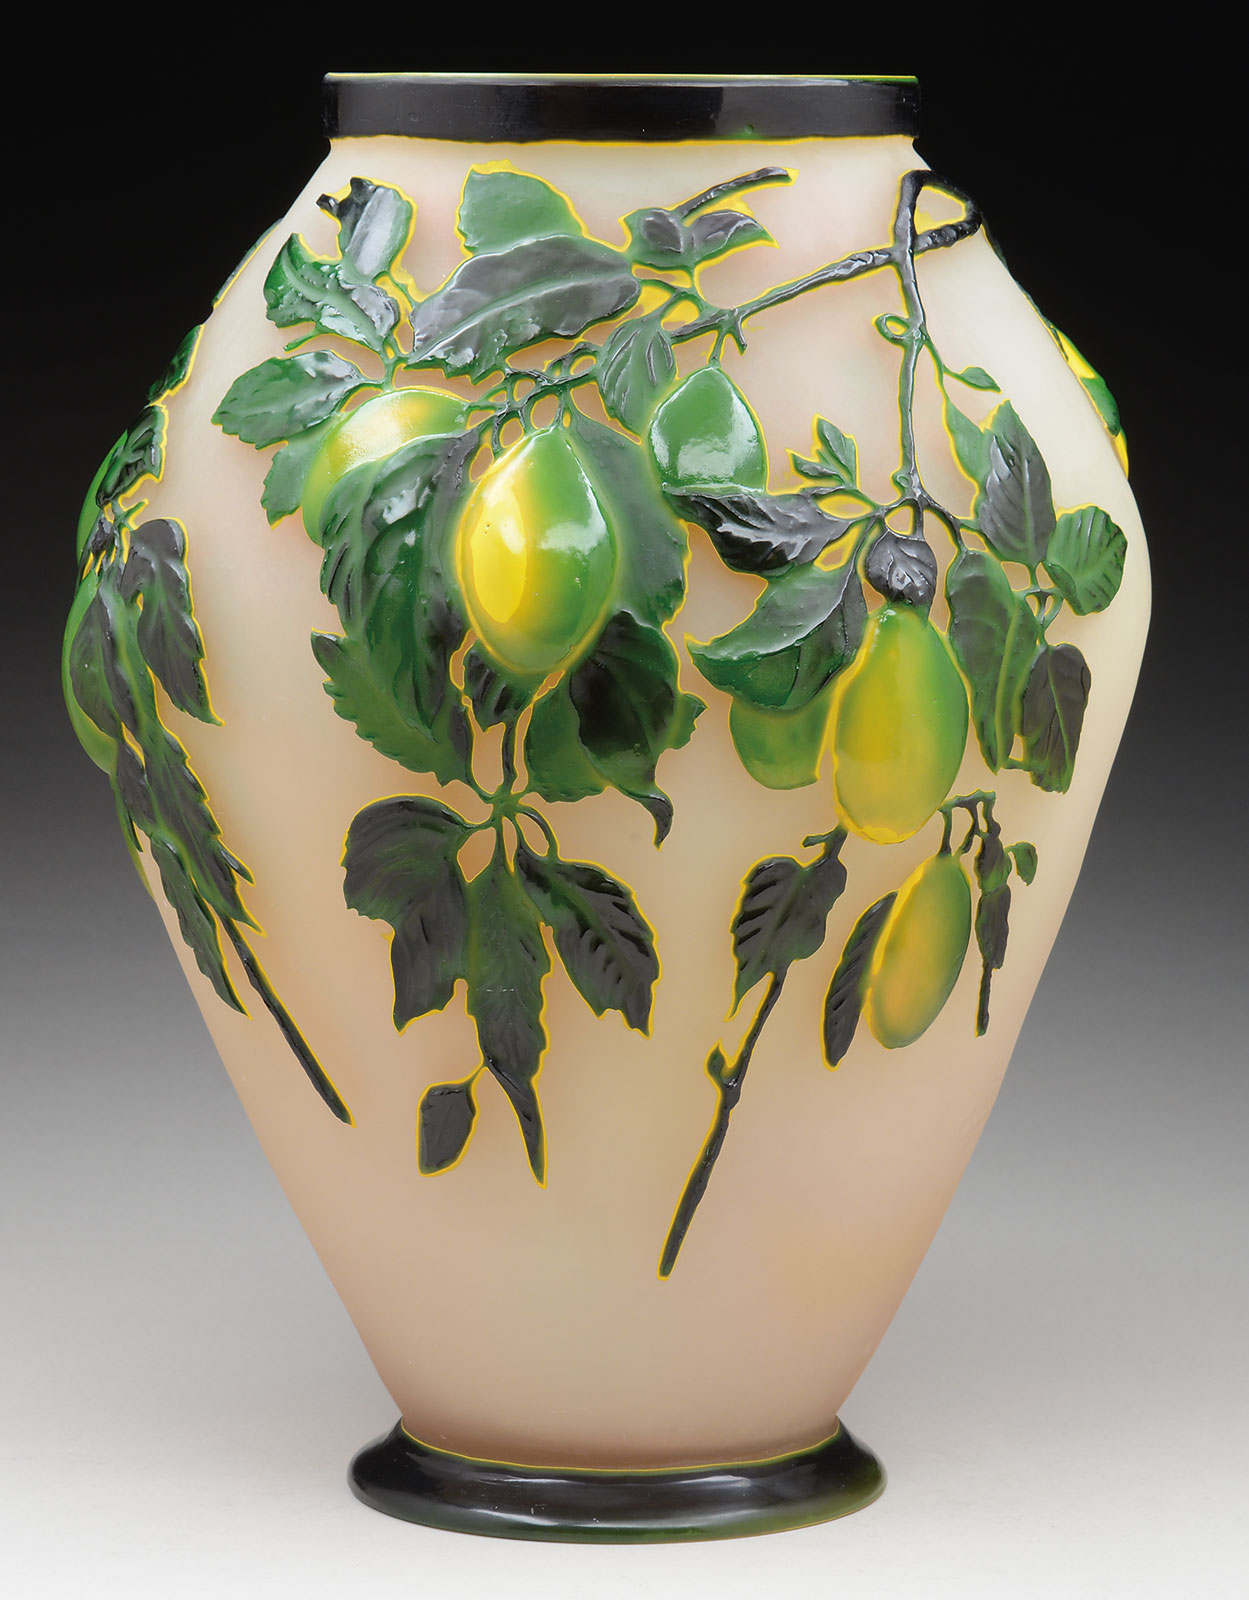 Galle Mold Blown Plum Vase, estimated at $20,000-25,000.